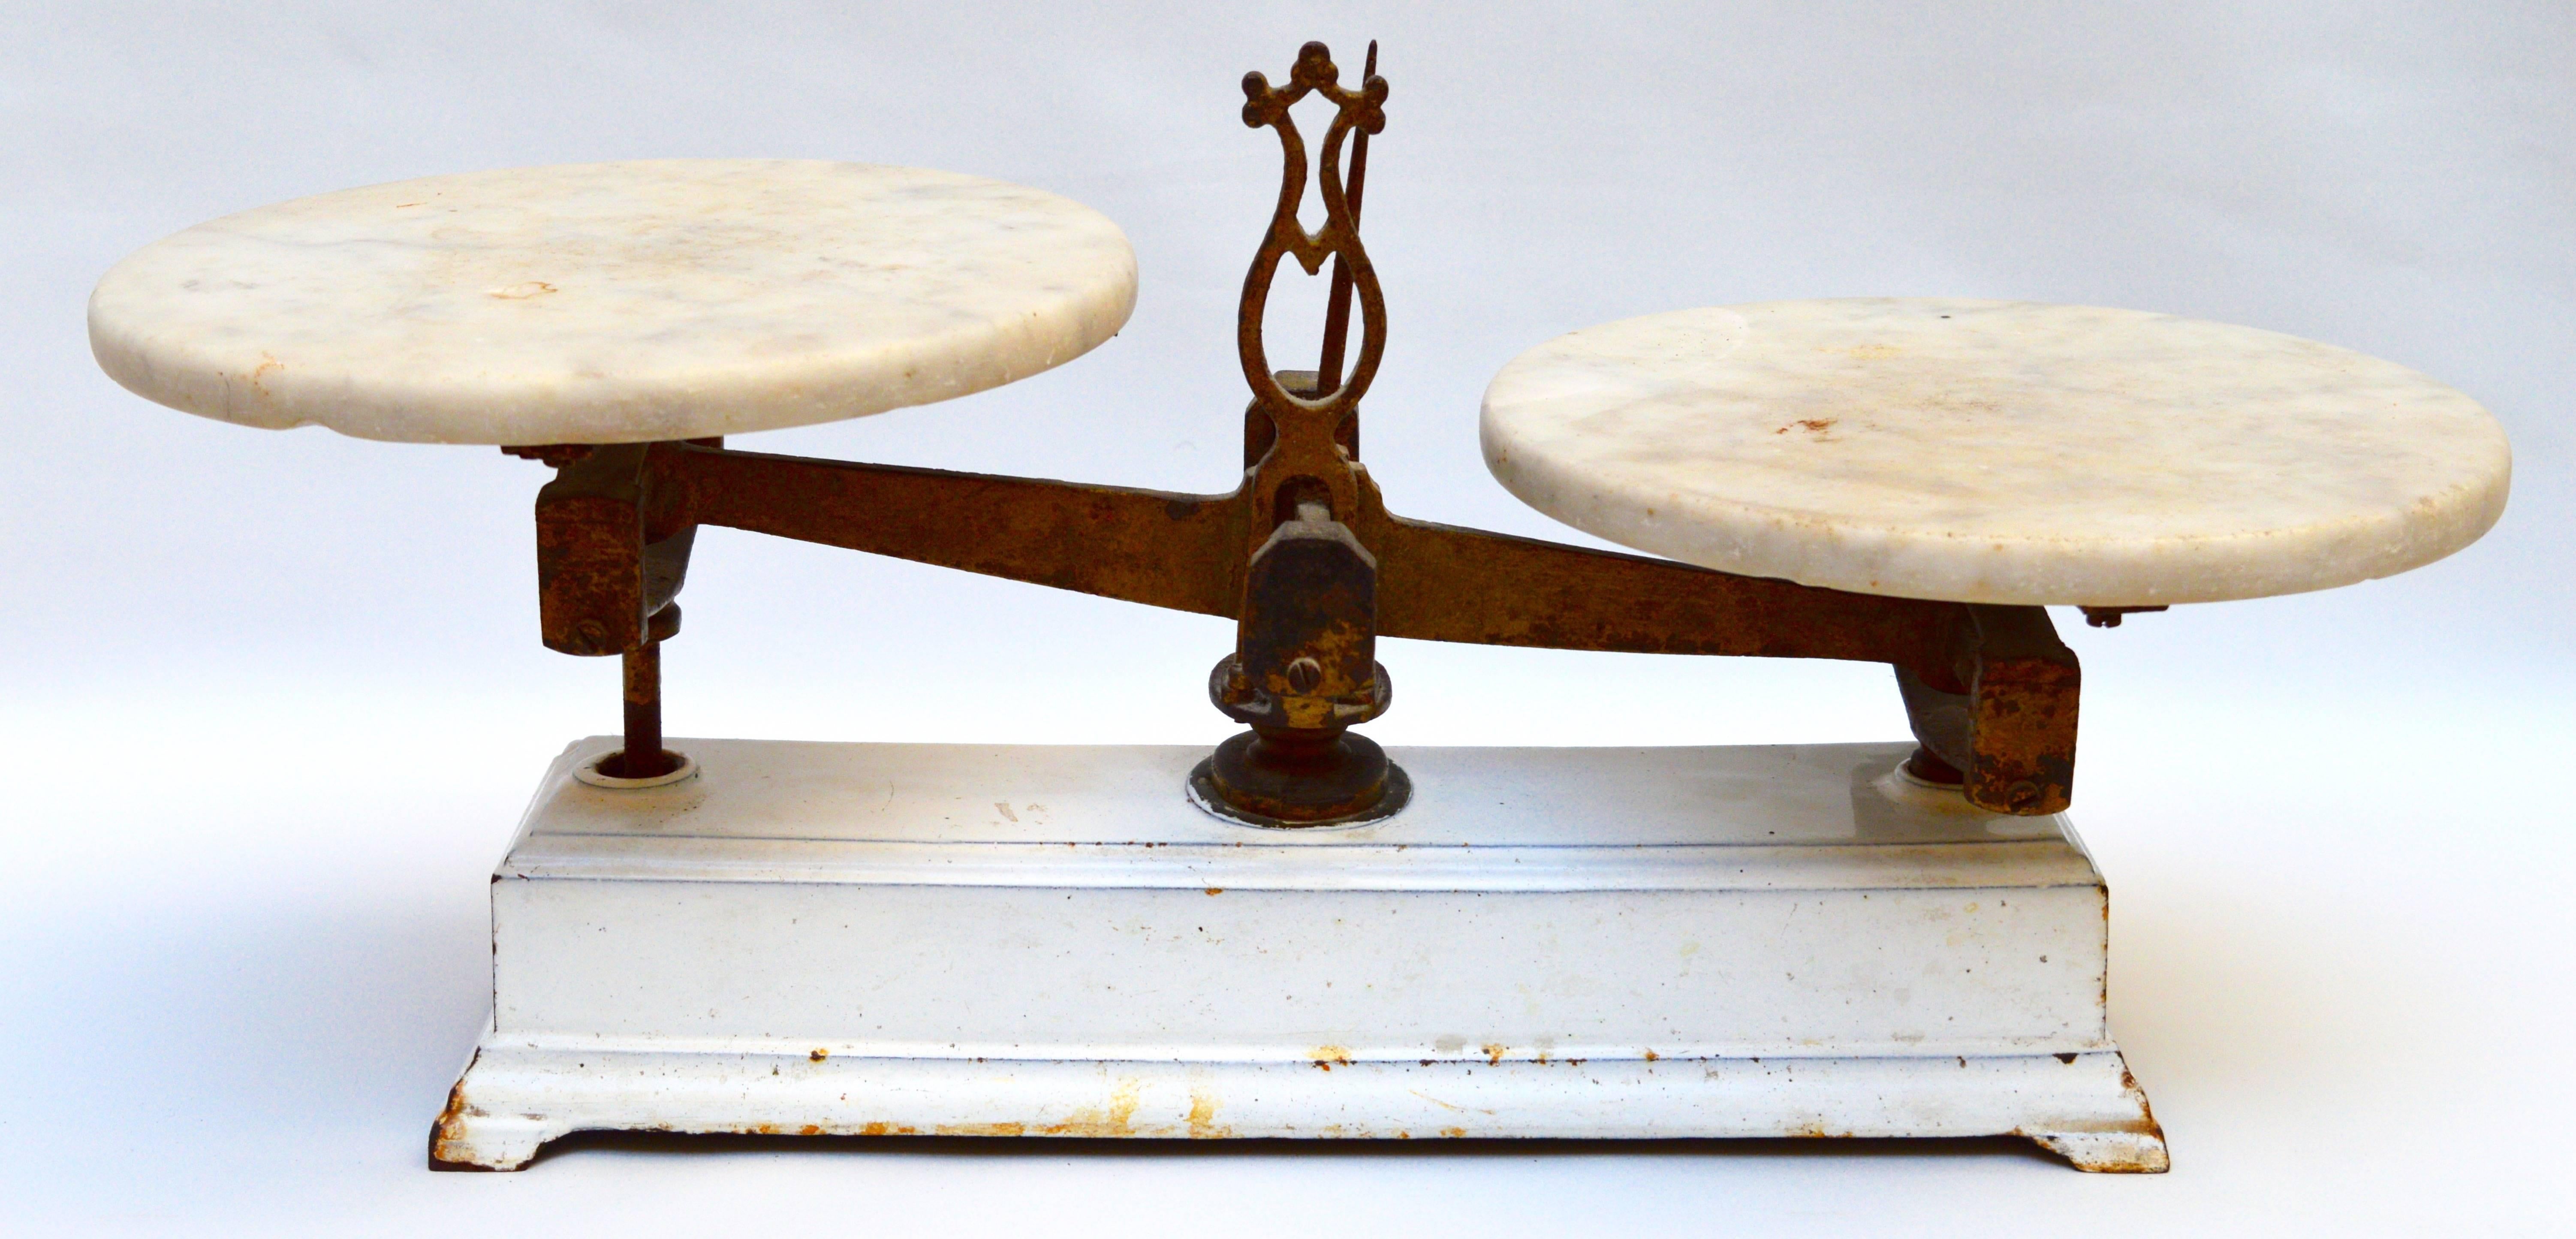 This 19th century scale has marble plates to weigh chocolates.
Made of cast iron with the original marble plates.